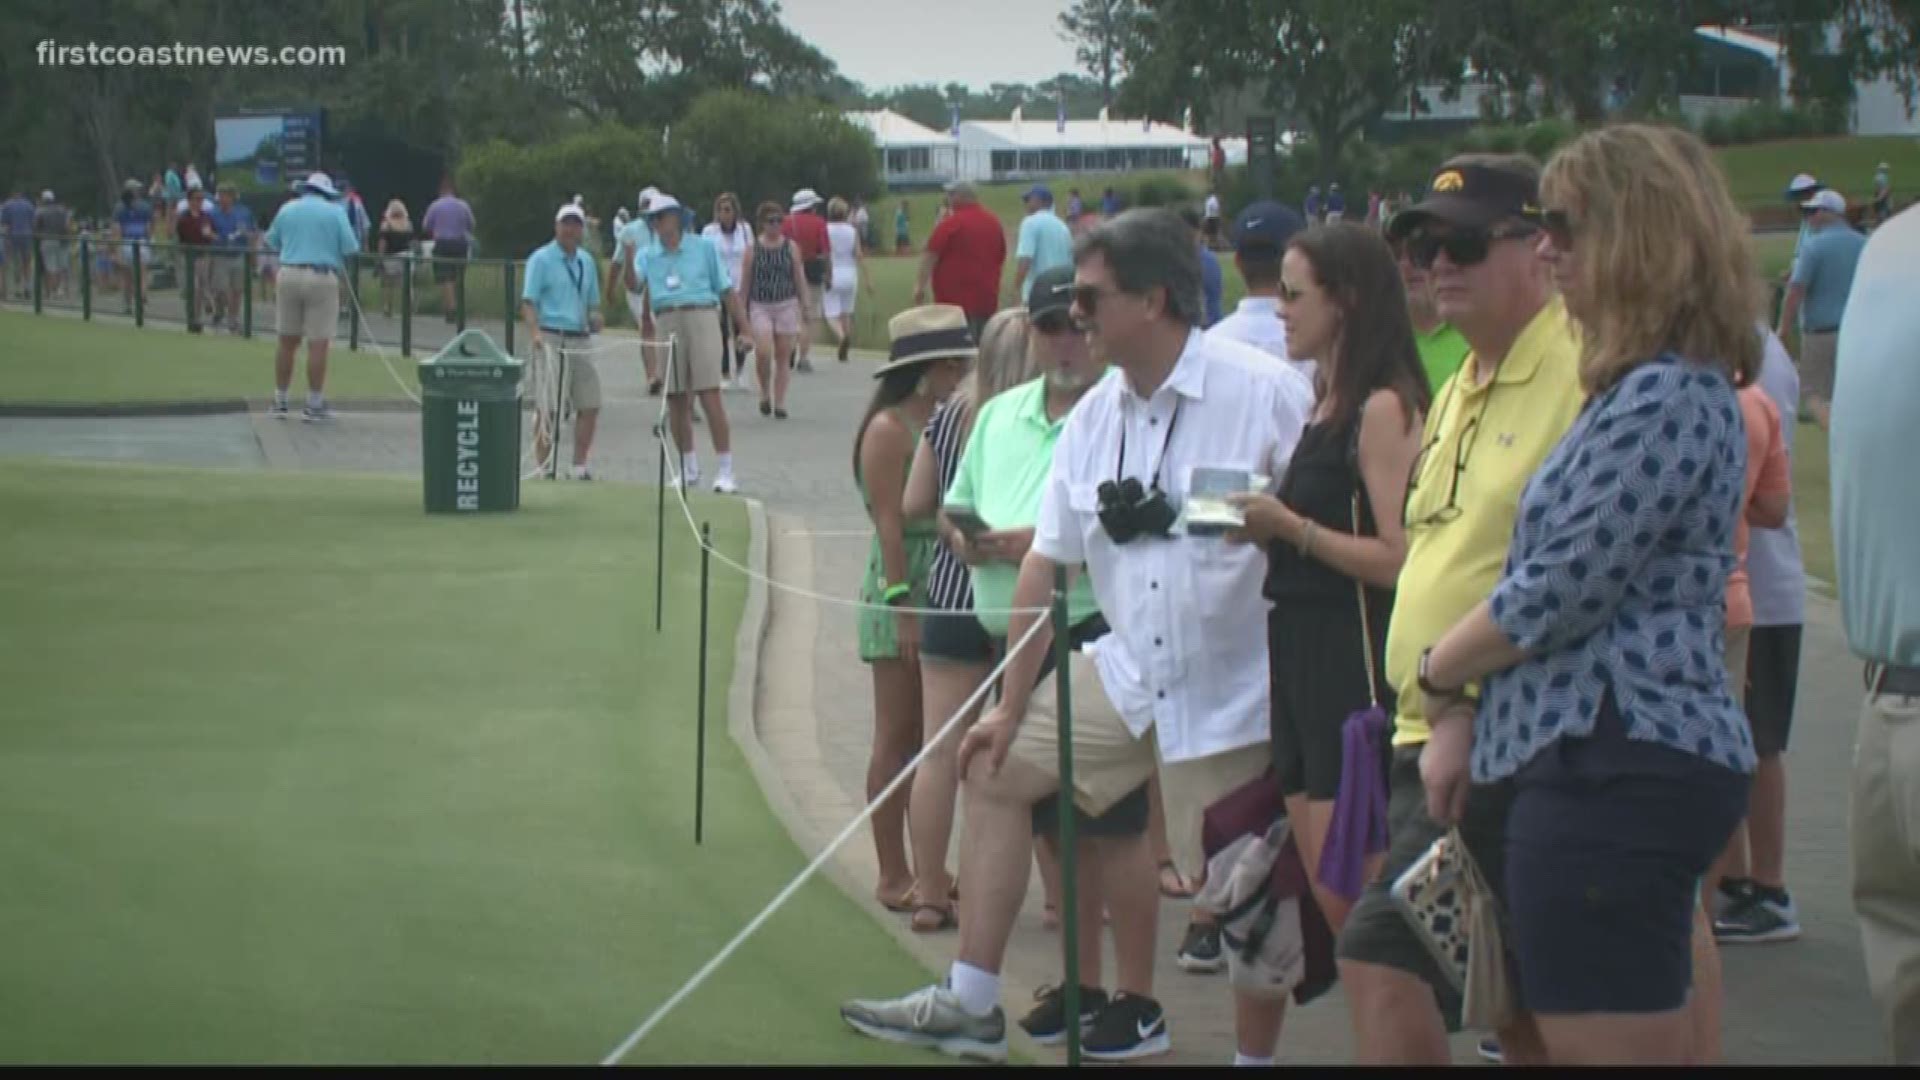 FCN's Juliette Dryer explains what Saturday was like at The Players Championship in Ponte Vedra.